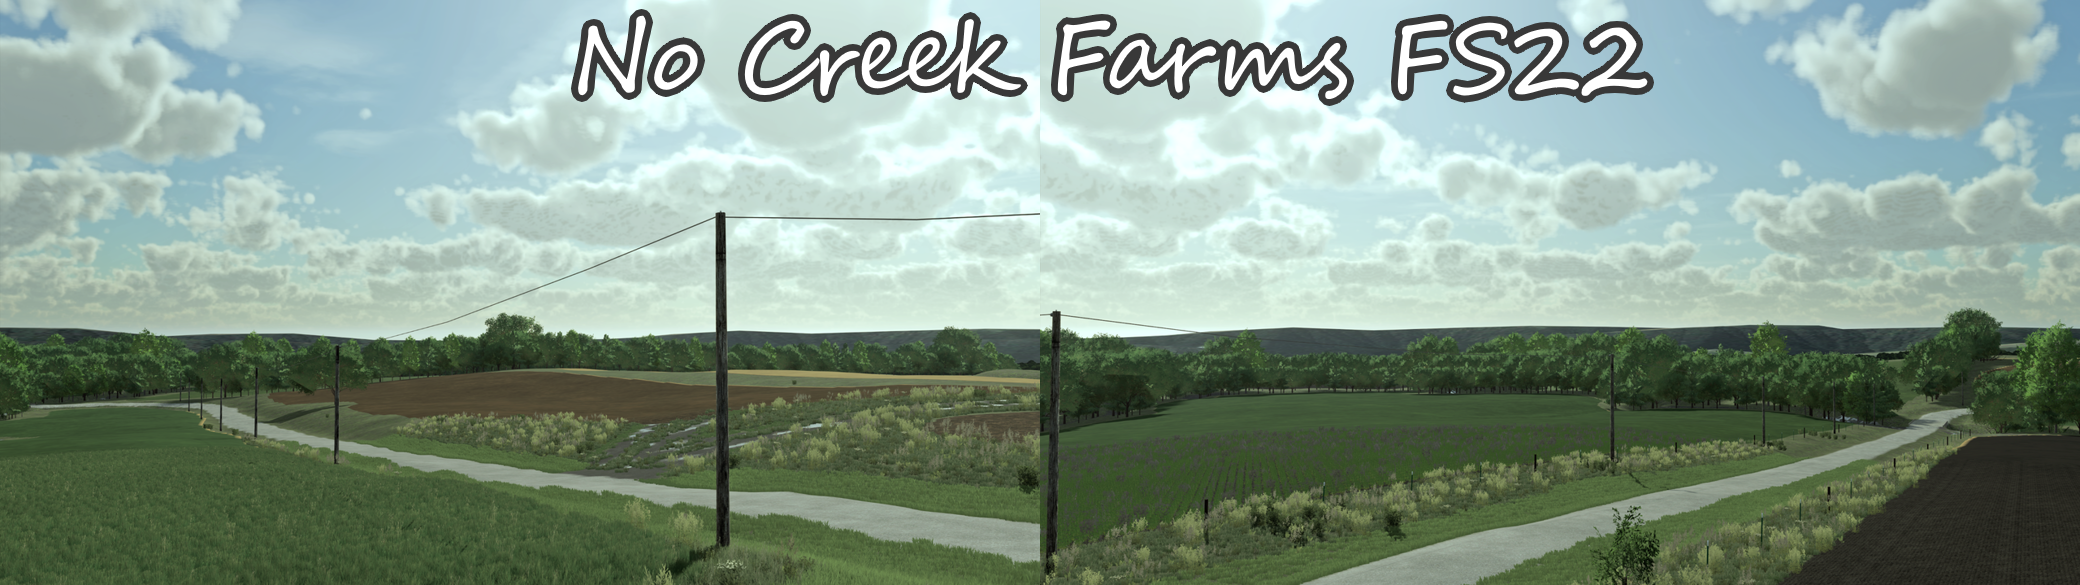 No Creek Farms Fs22 By Large H Mapping 5168